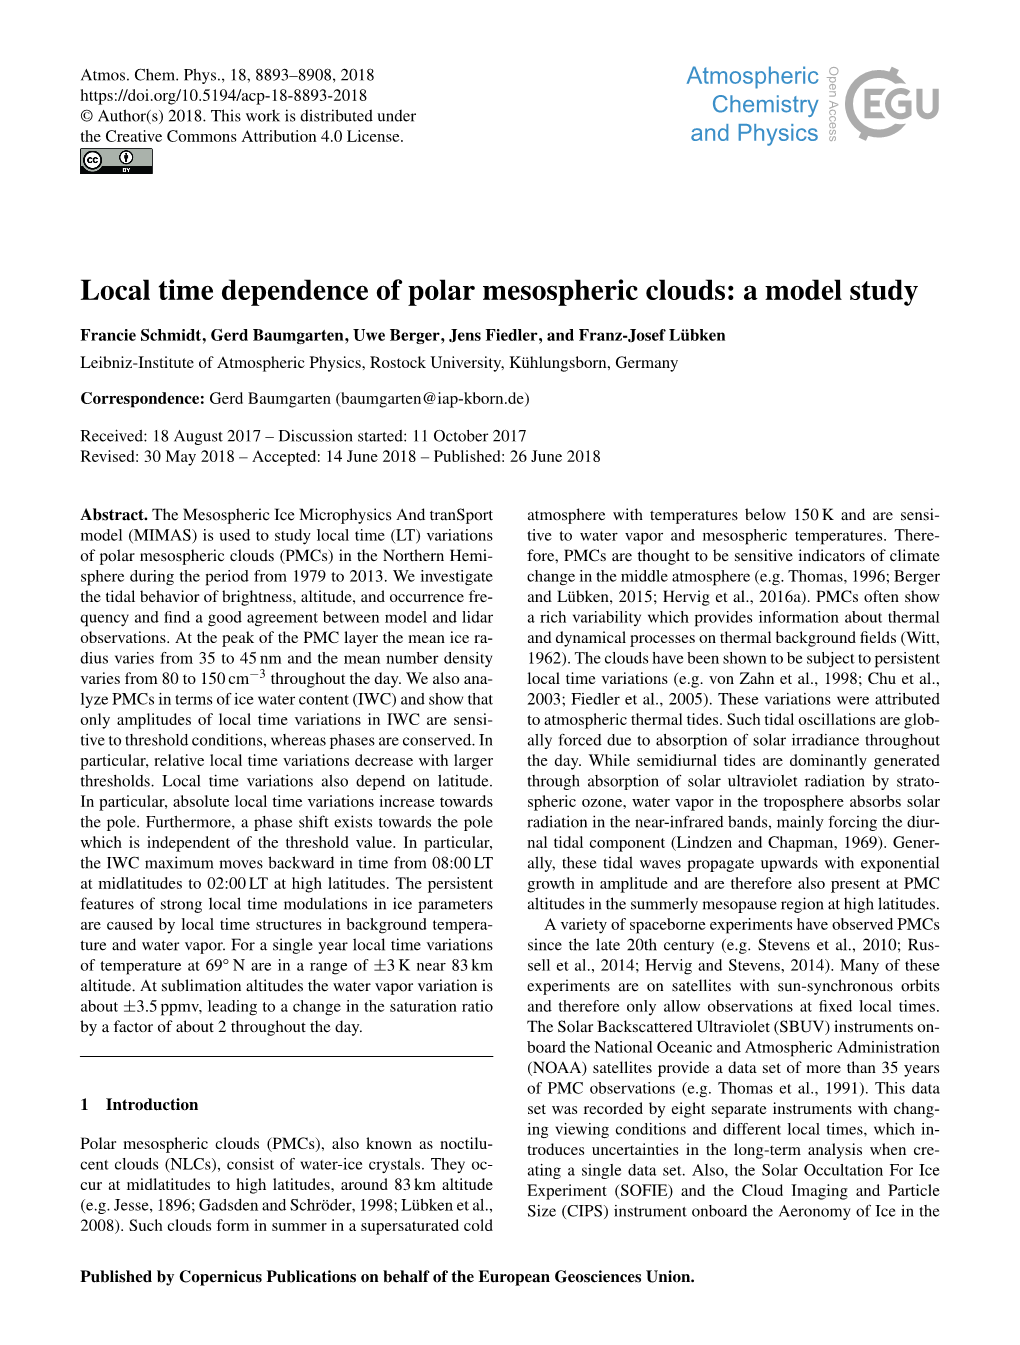 Local Time Dependence of Polar Mesospheric Clouds: a Model Study